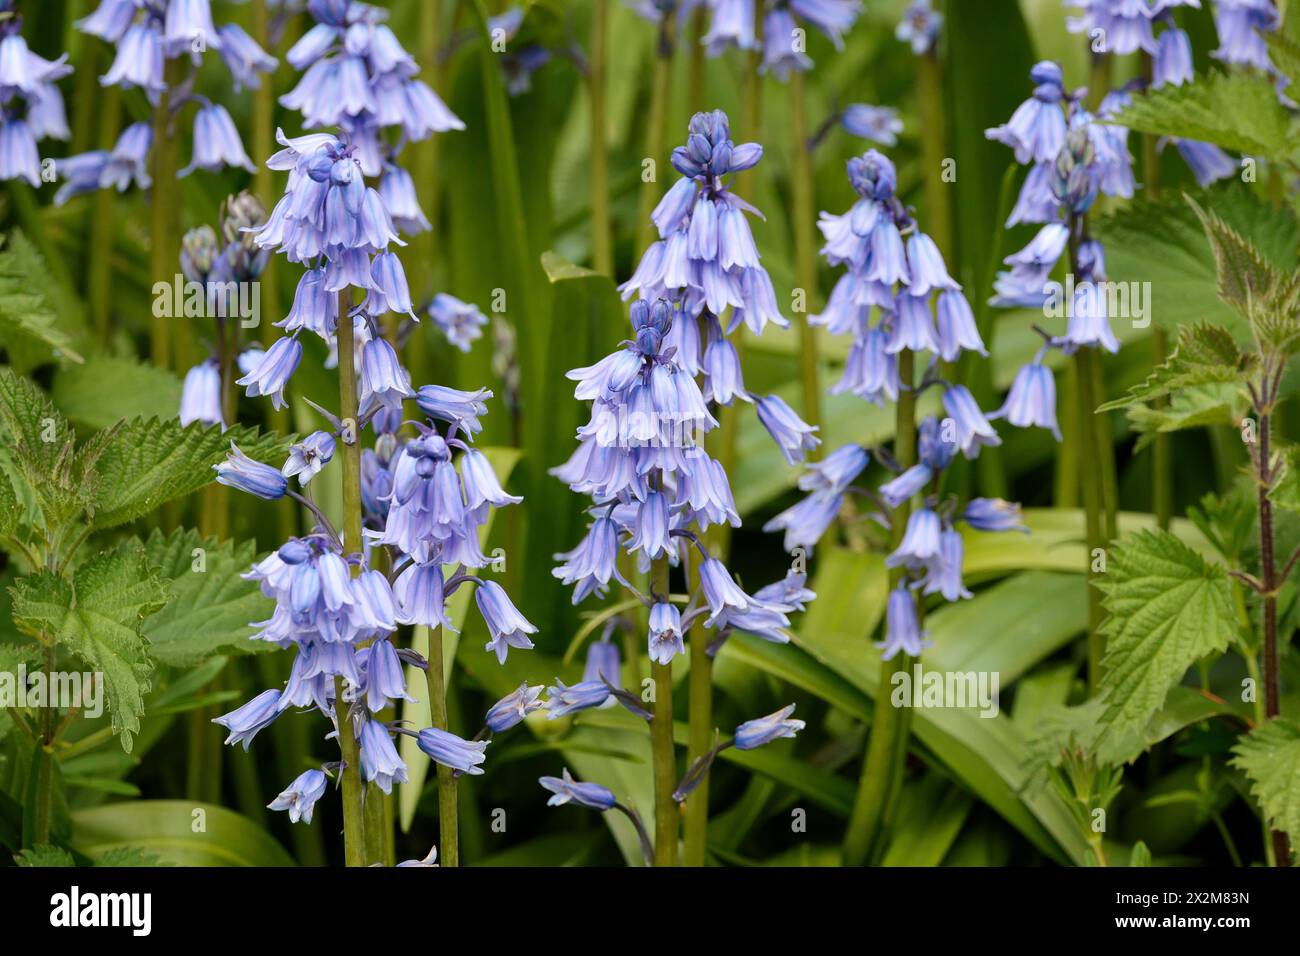 Spanish bluebells hyacinthoides hispanica,  pale blue purple conical bell shaped flowers spread with open tips grows all around upright stem no scent Stock Photo